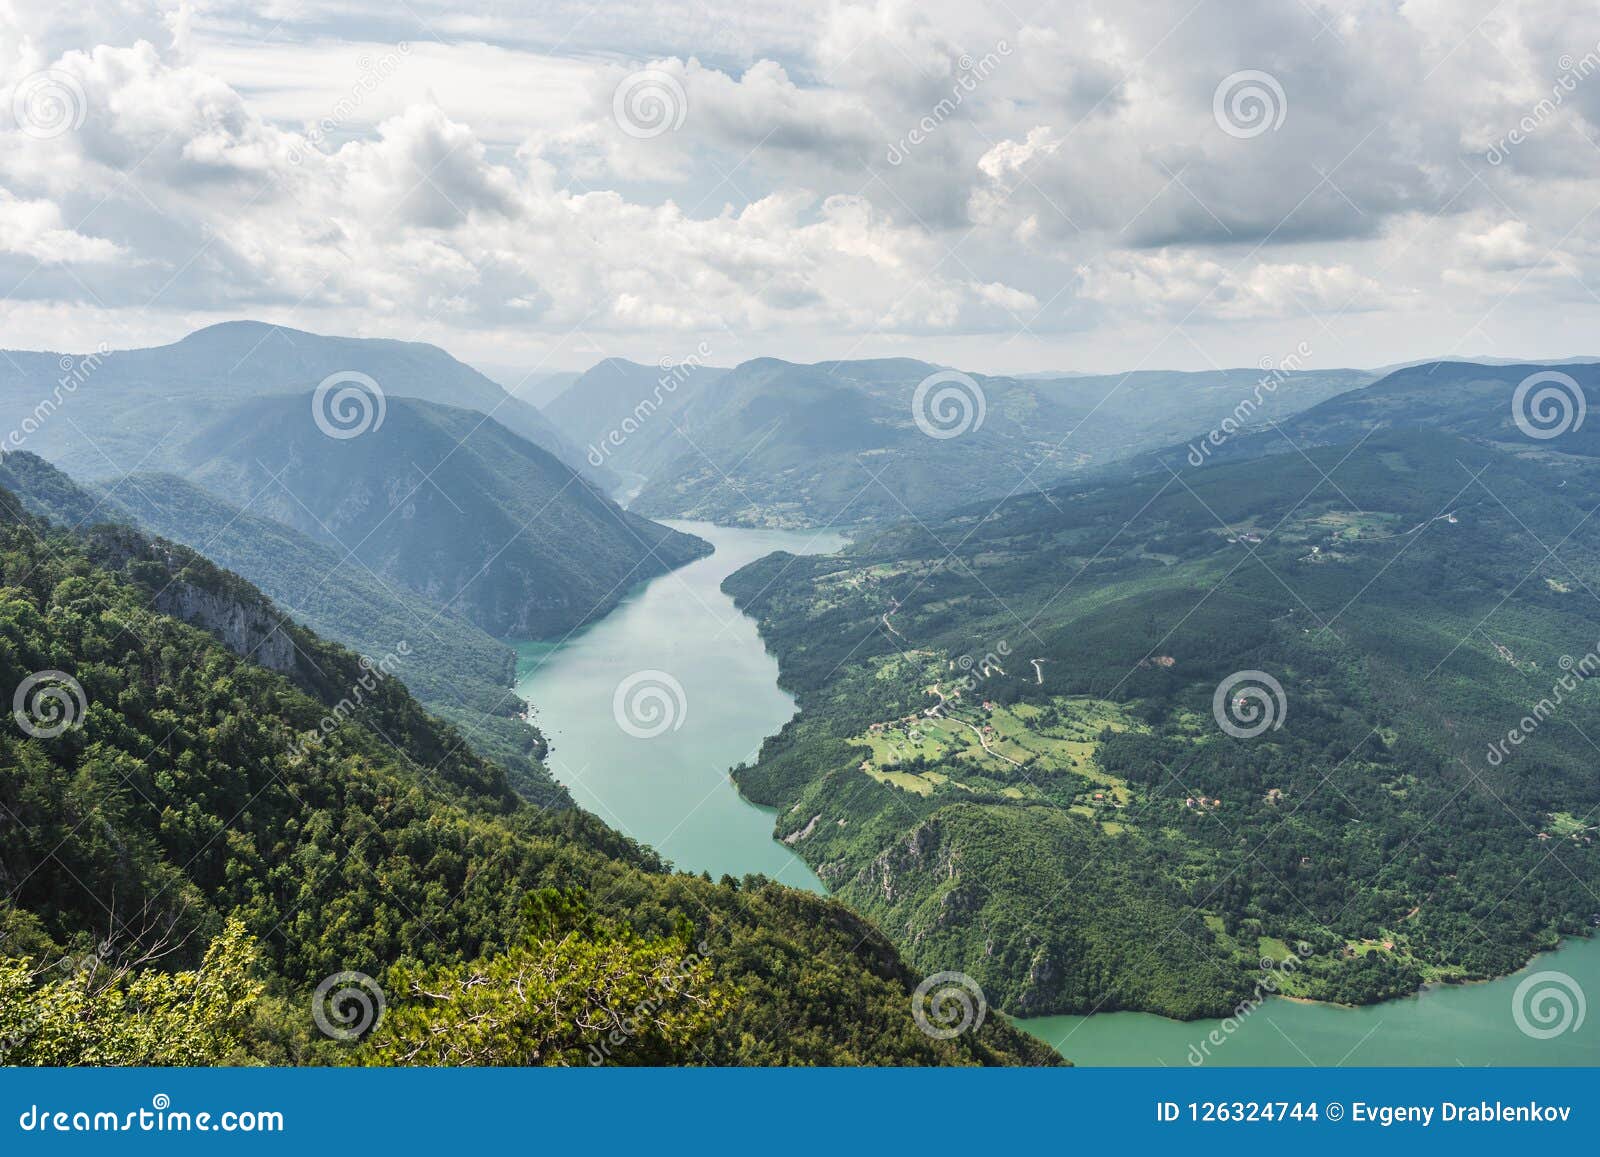 landscape view from banjska stena on drina river, mountains, dam and borde